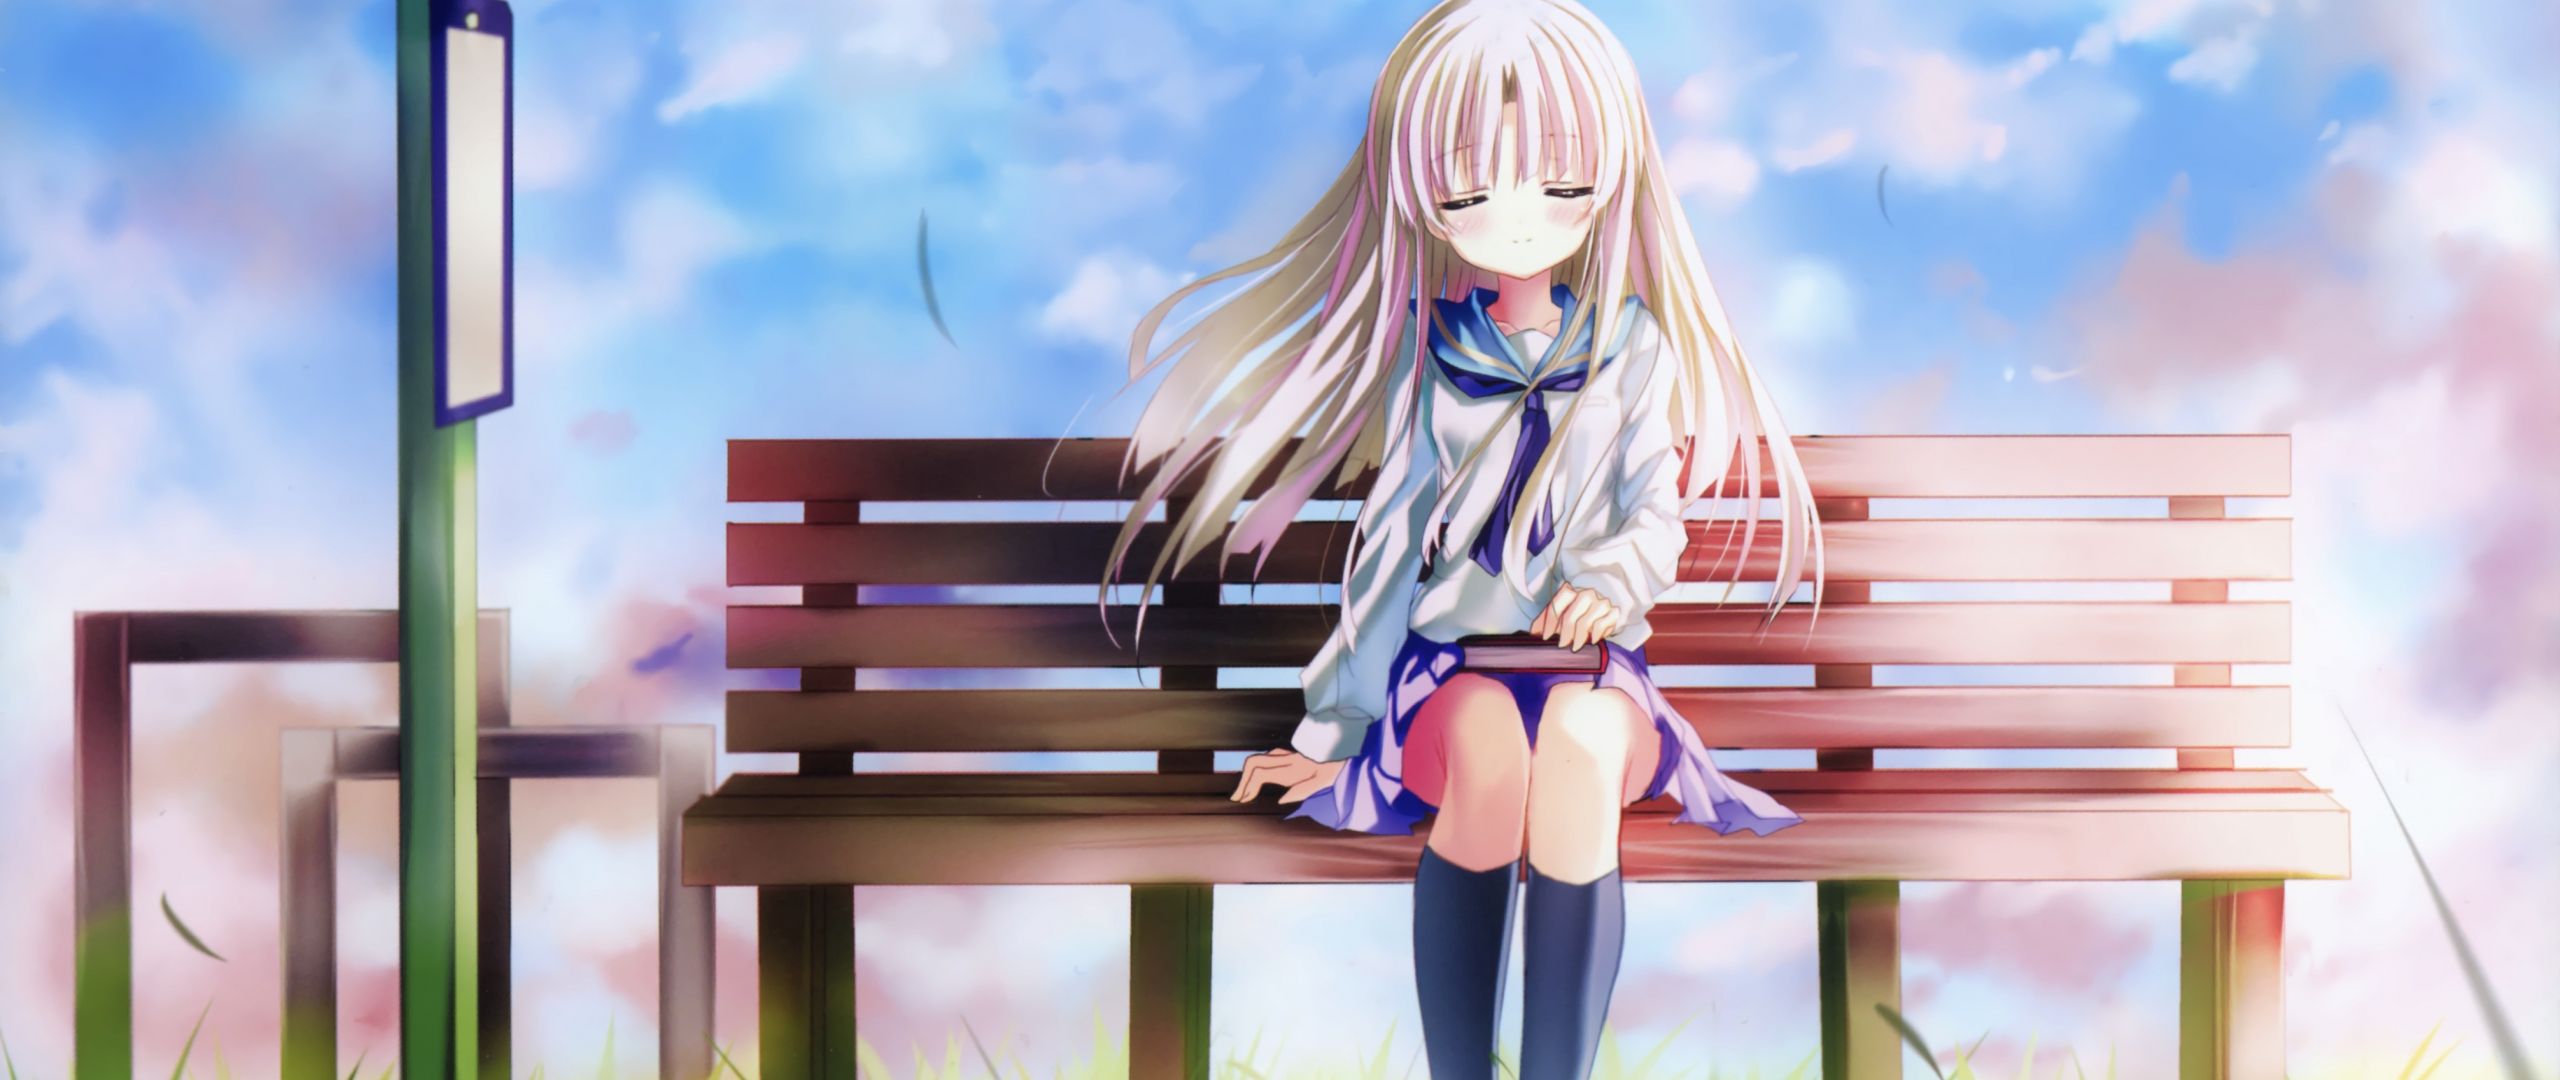 Desktop Wallpaper Cute Girl, Bench, Sit, Relaxed, Anime, HD Image, Picture, Background, Ii1kpr